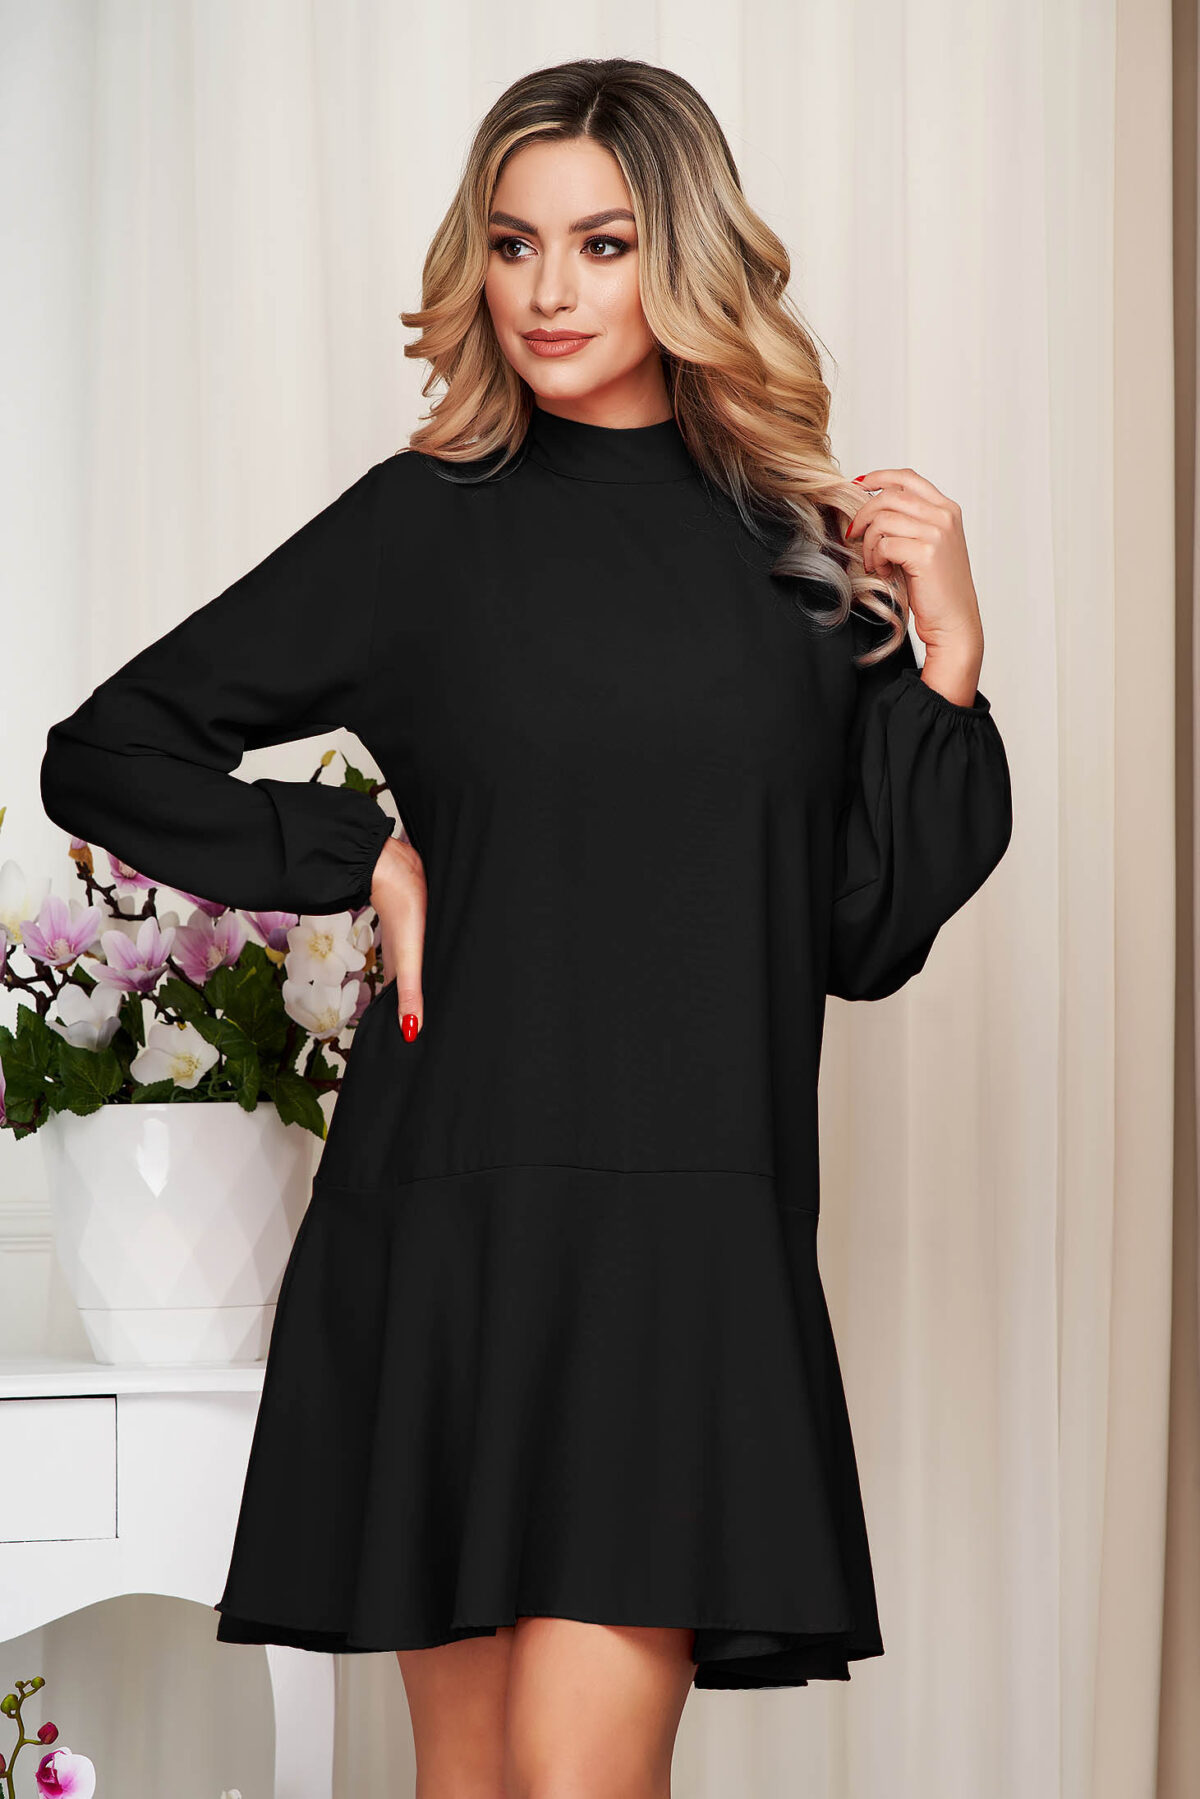 Black Dress Loose Fit With Ruffle Details With Turtle Neck